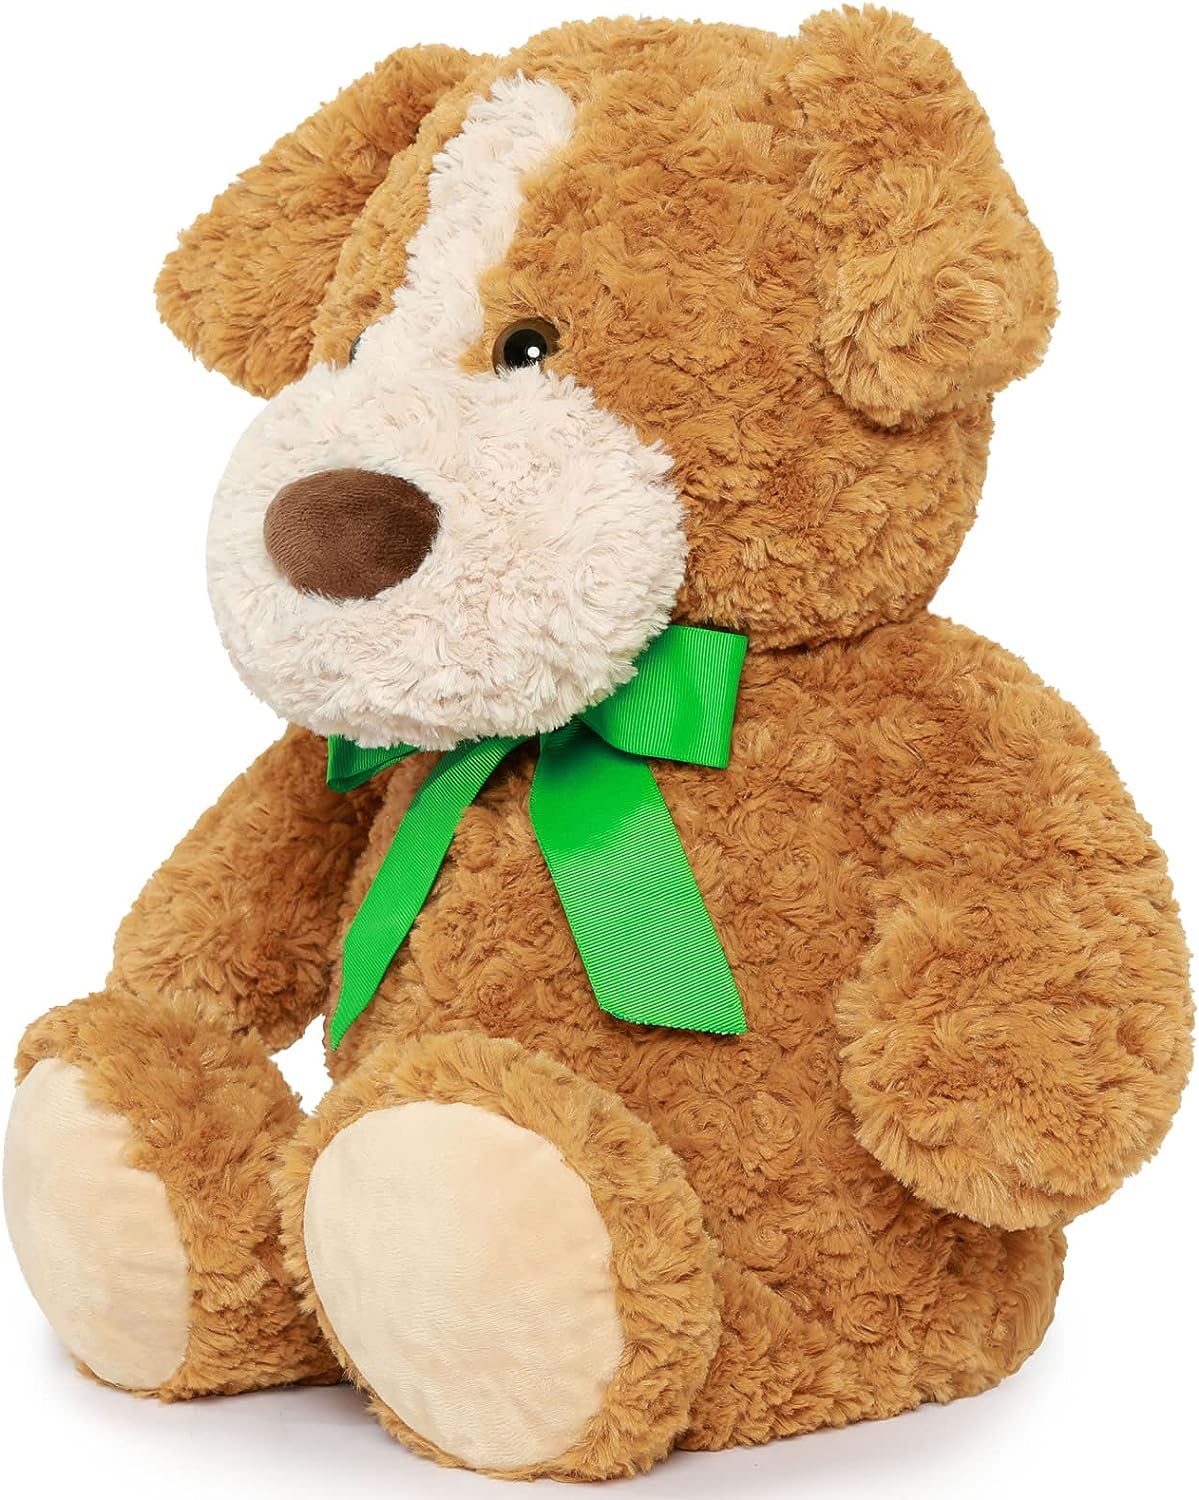 Adorable Dog Plush Toy, 24 Inches